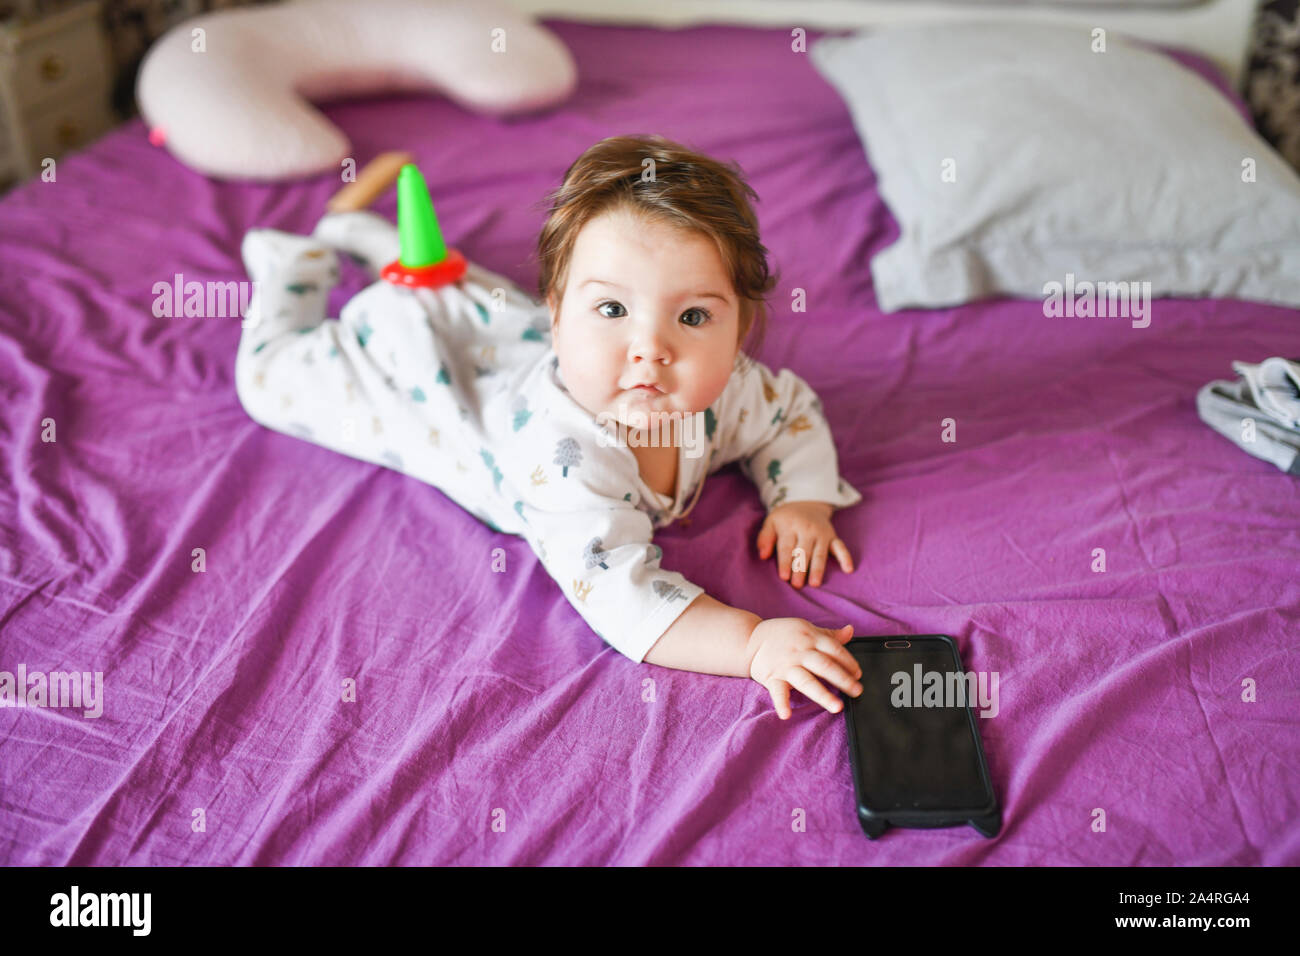 child and mobile device. Little girl in bed looking at a smartphone Stock Photo